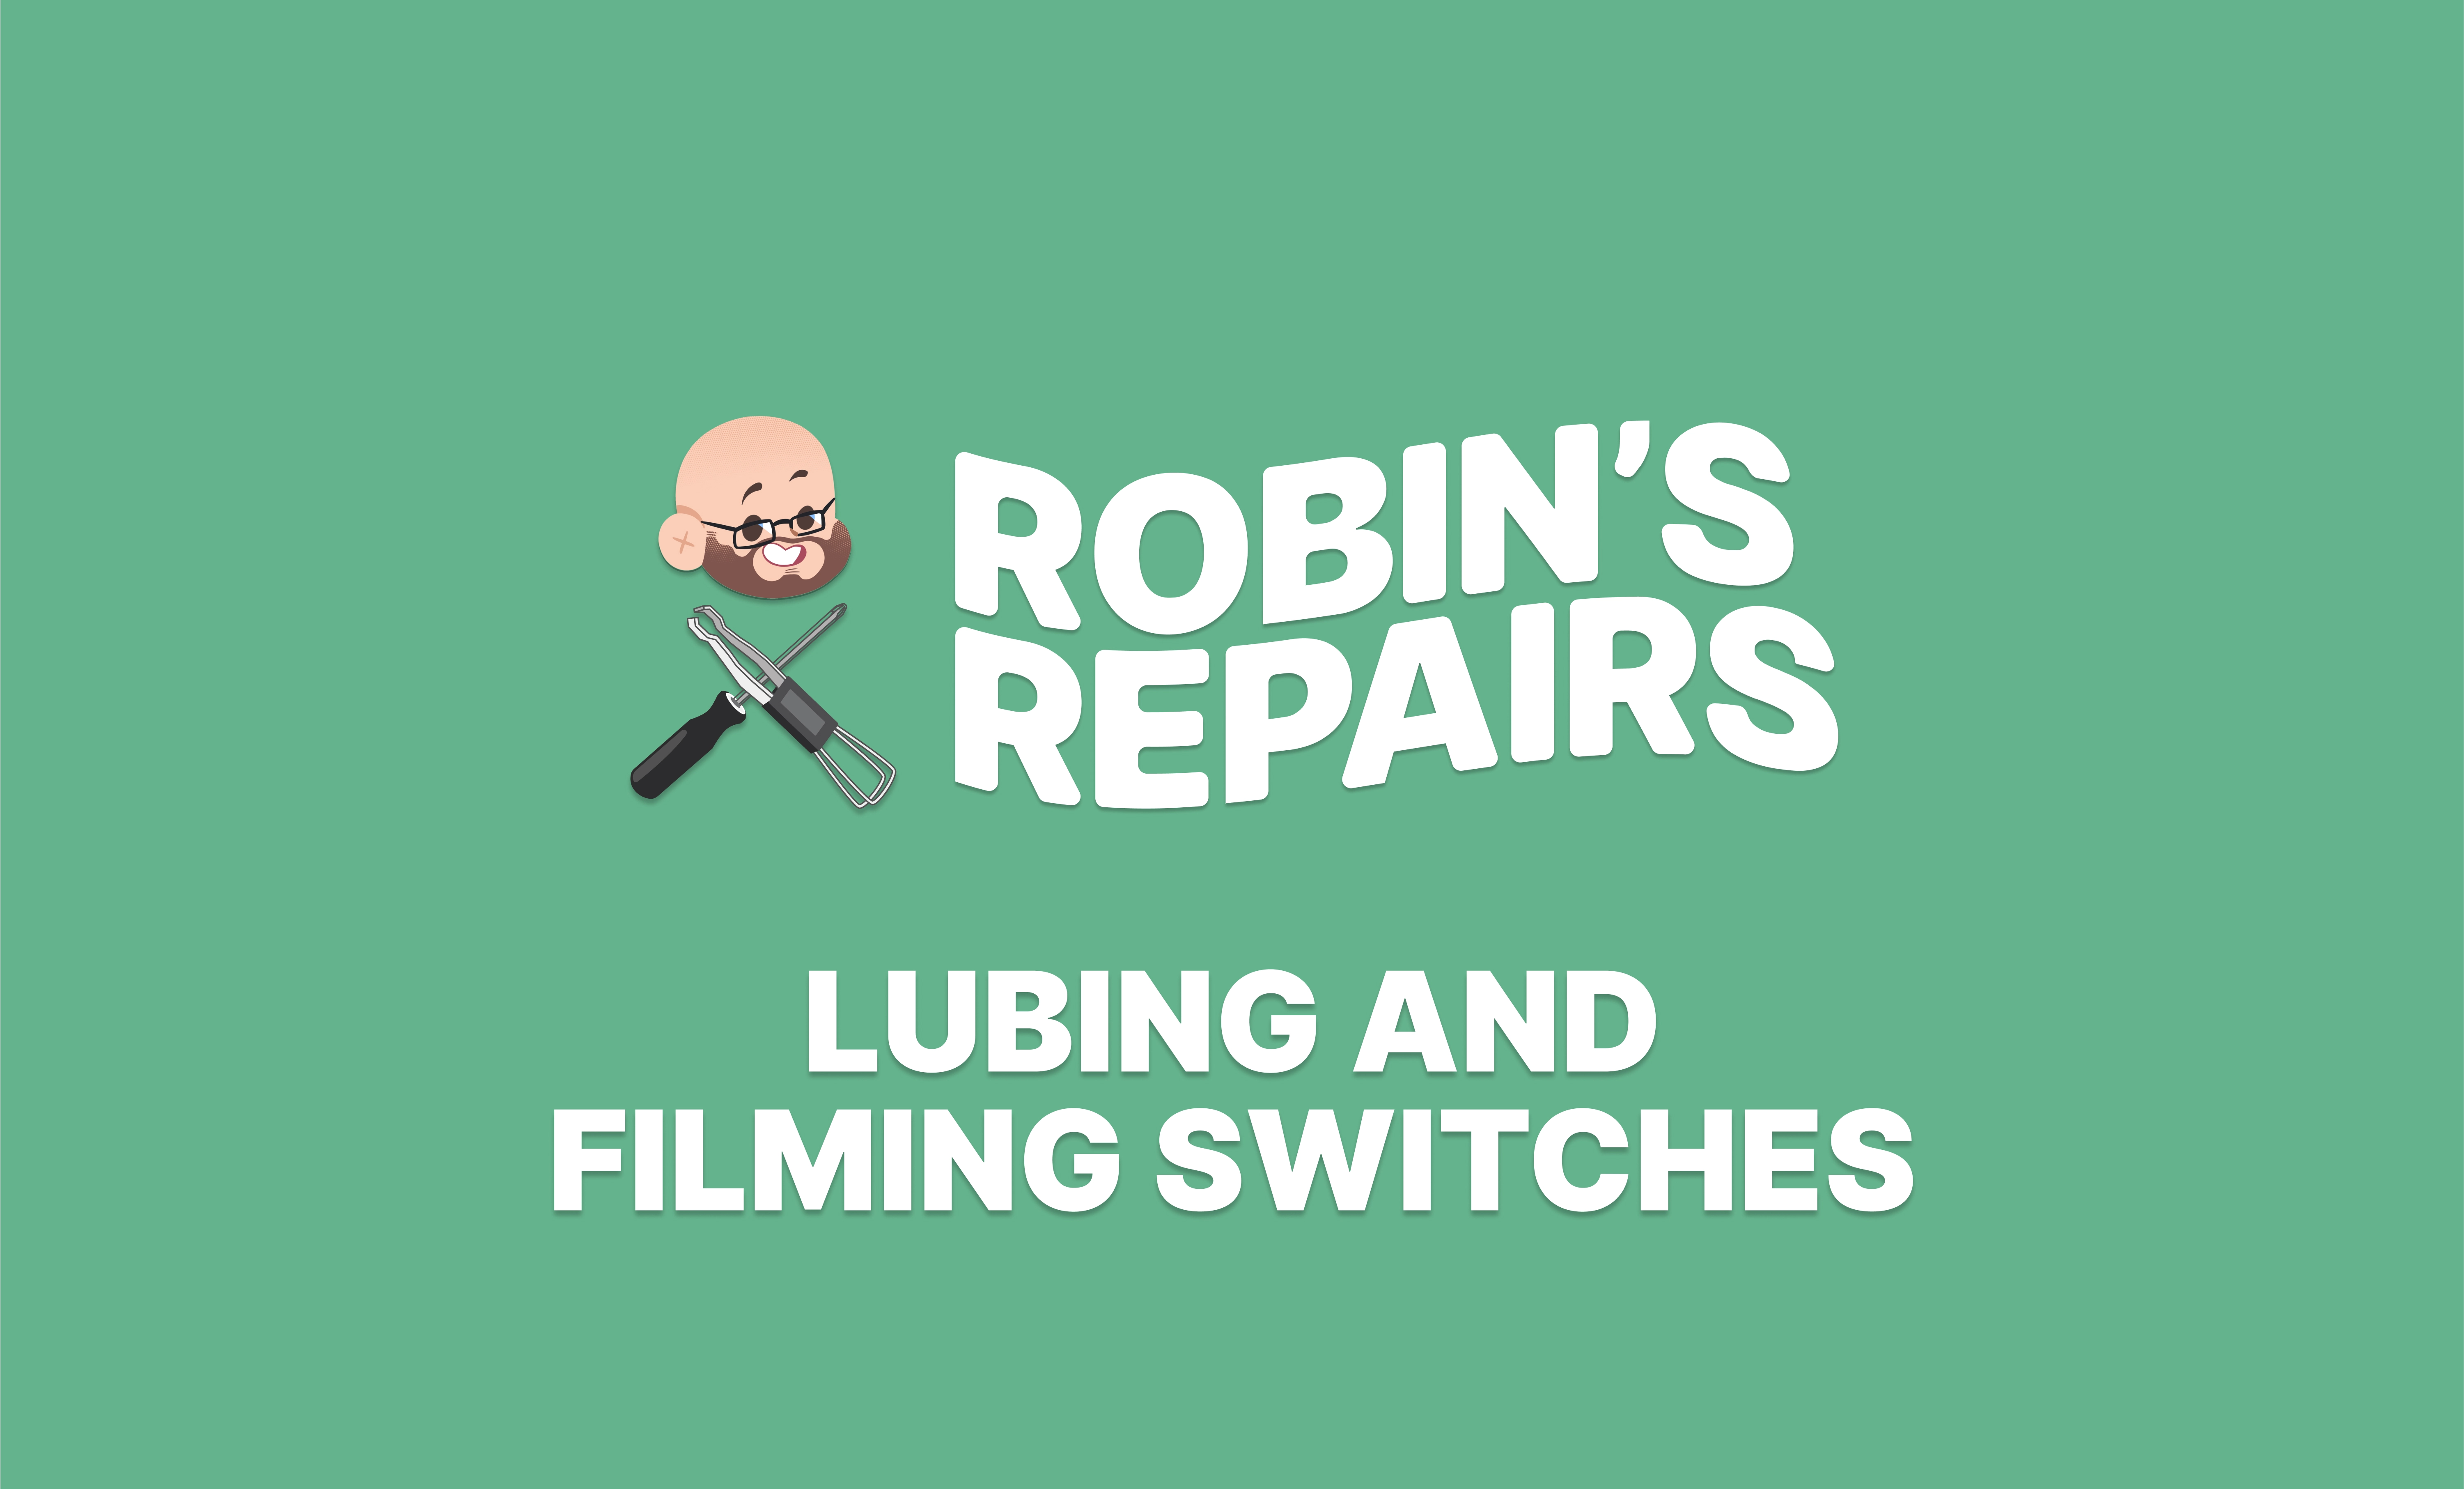 Lubing and filming switches